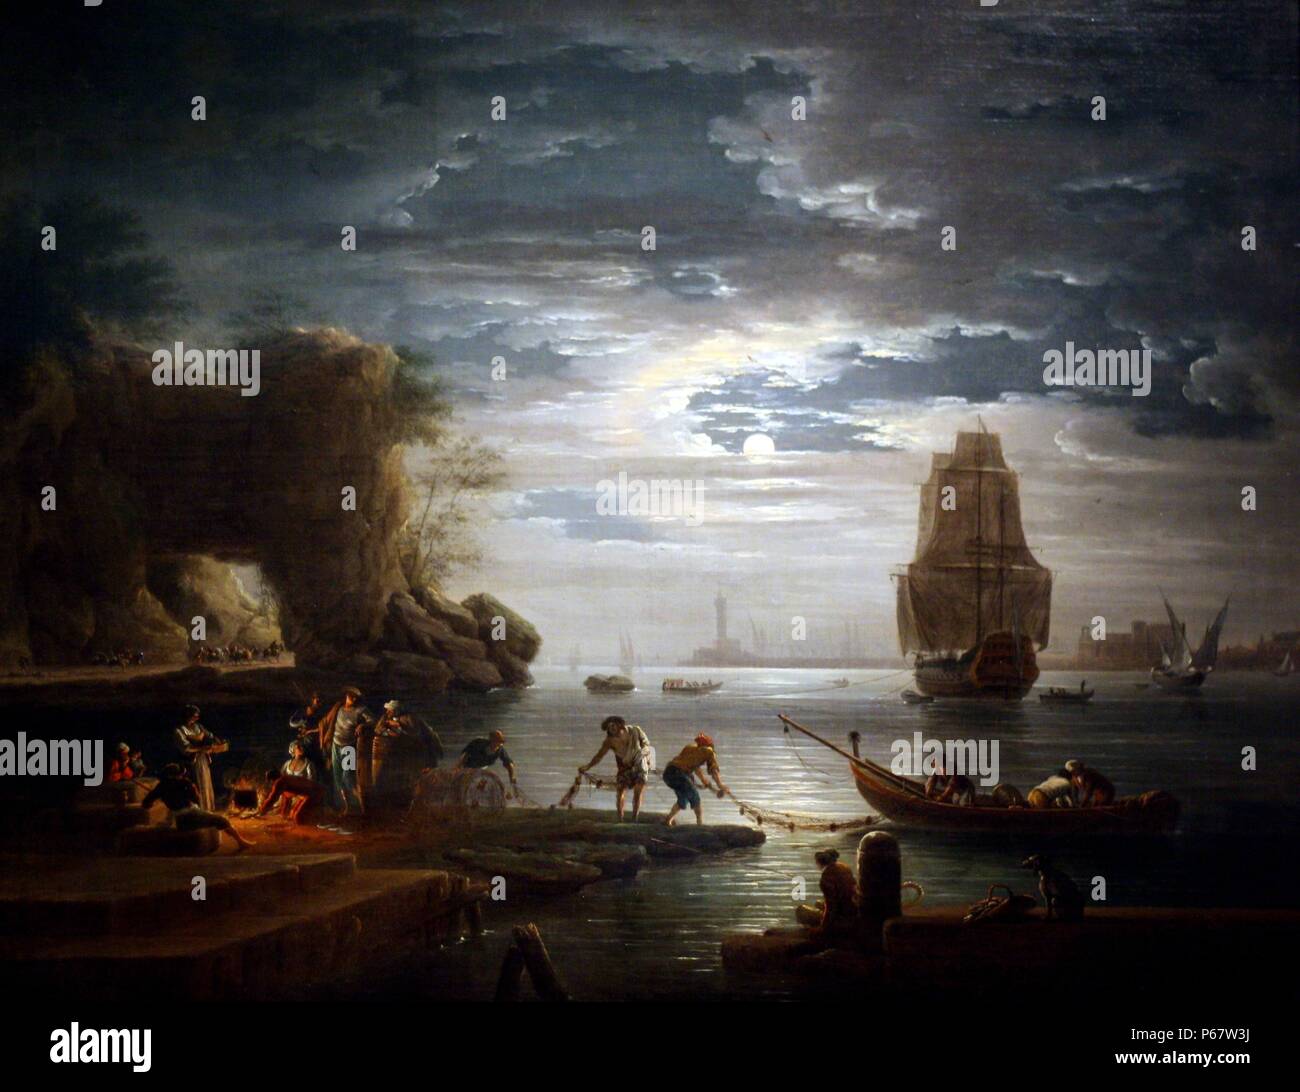 Coastal Scene by Claude-Joseph Vernet (1714-1789).  Oil on canvas.  This nocturnal seascape recalls the rocky coastline near Naples.  In contrasting scenes representing Morning, Noon, Evening and Night, Vernet combined idealized views with carefully observed lightning and  weather conditions. Stock Photo